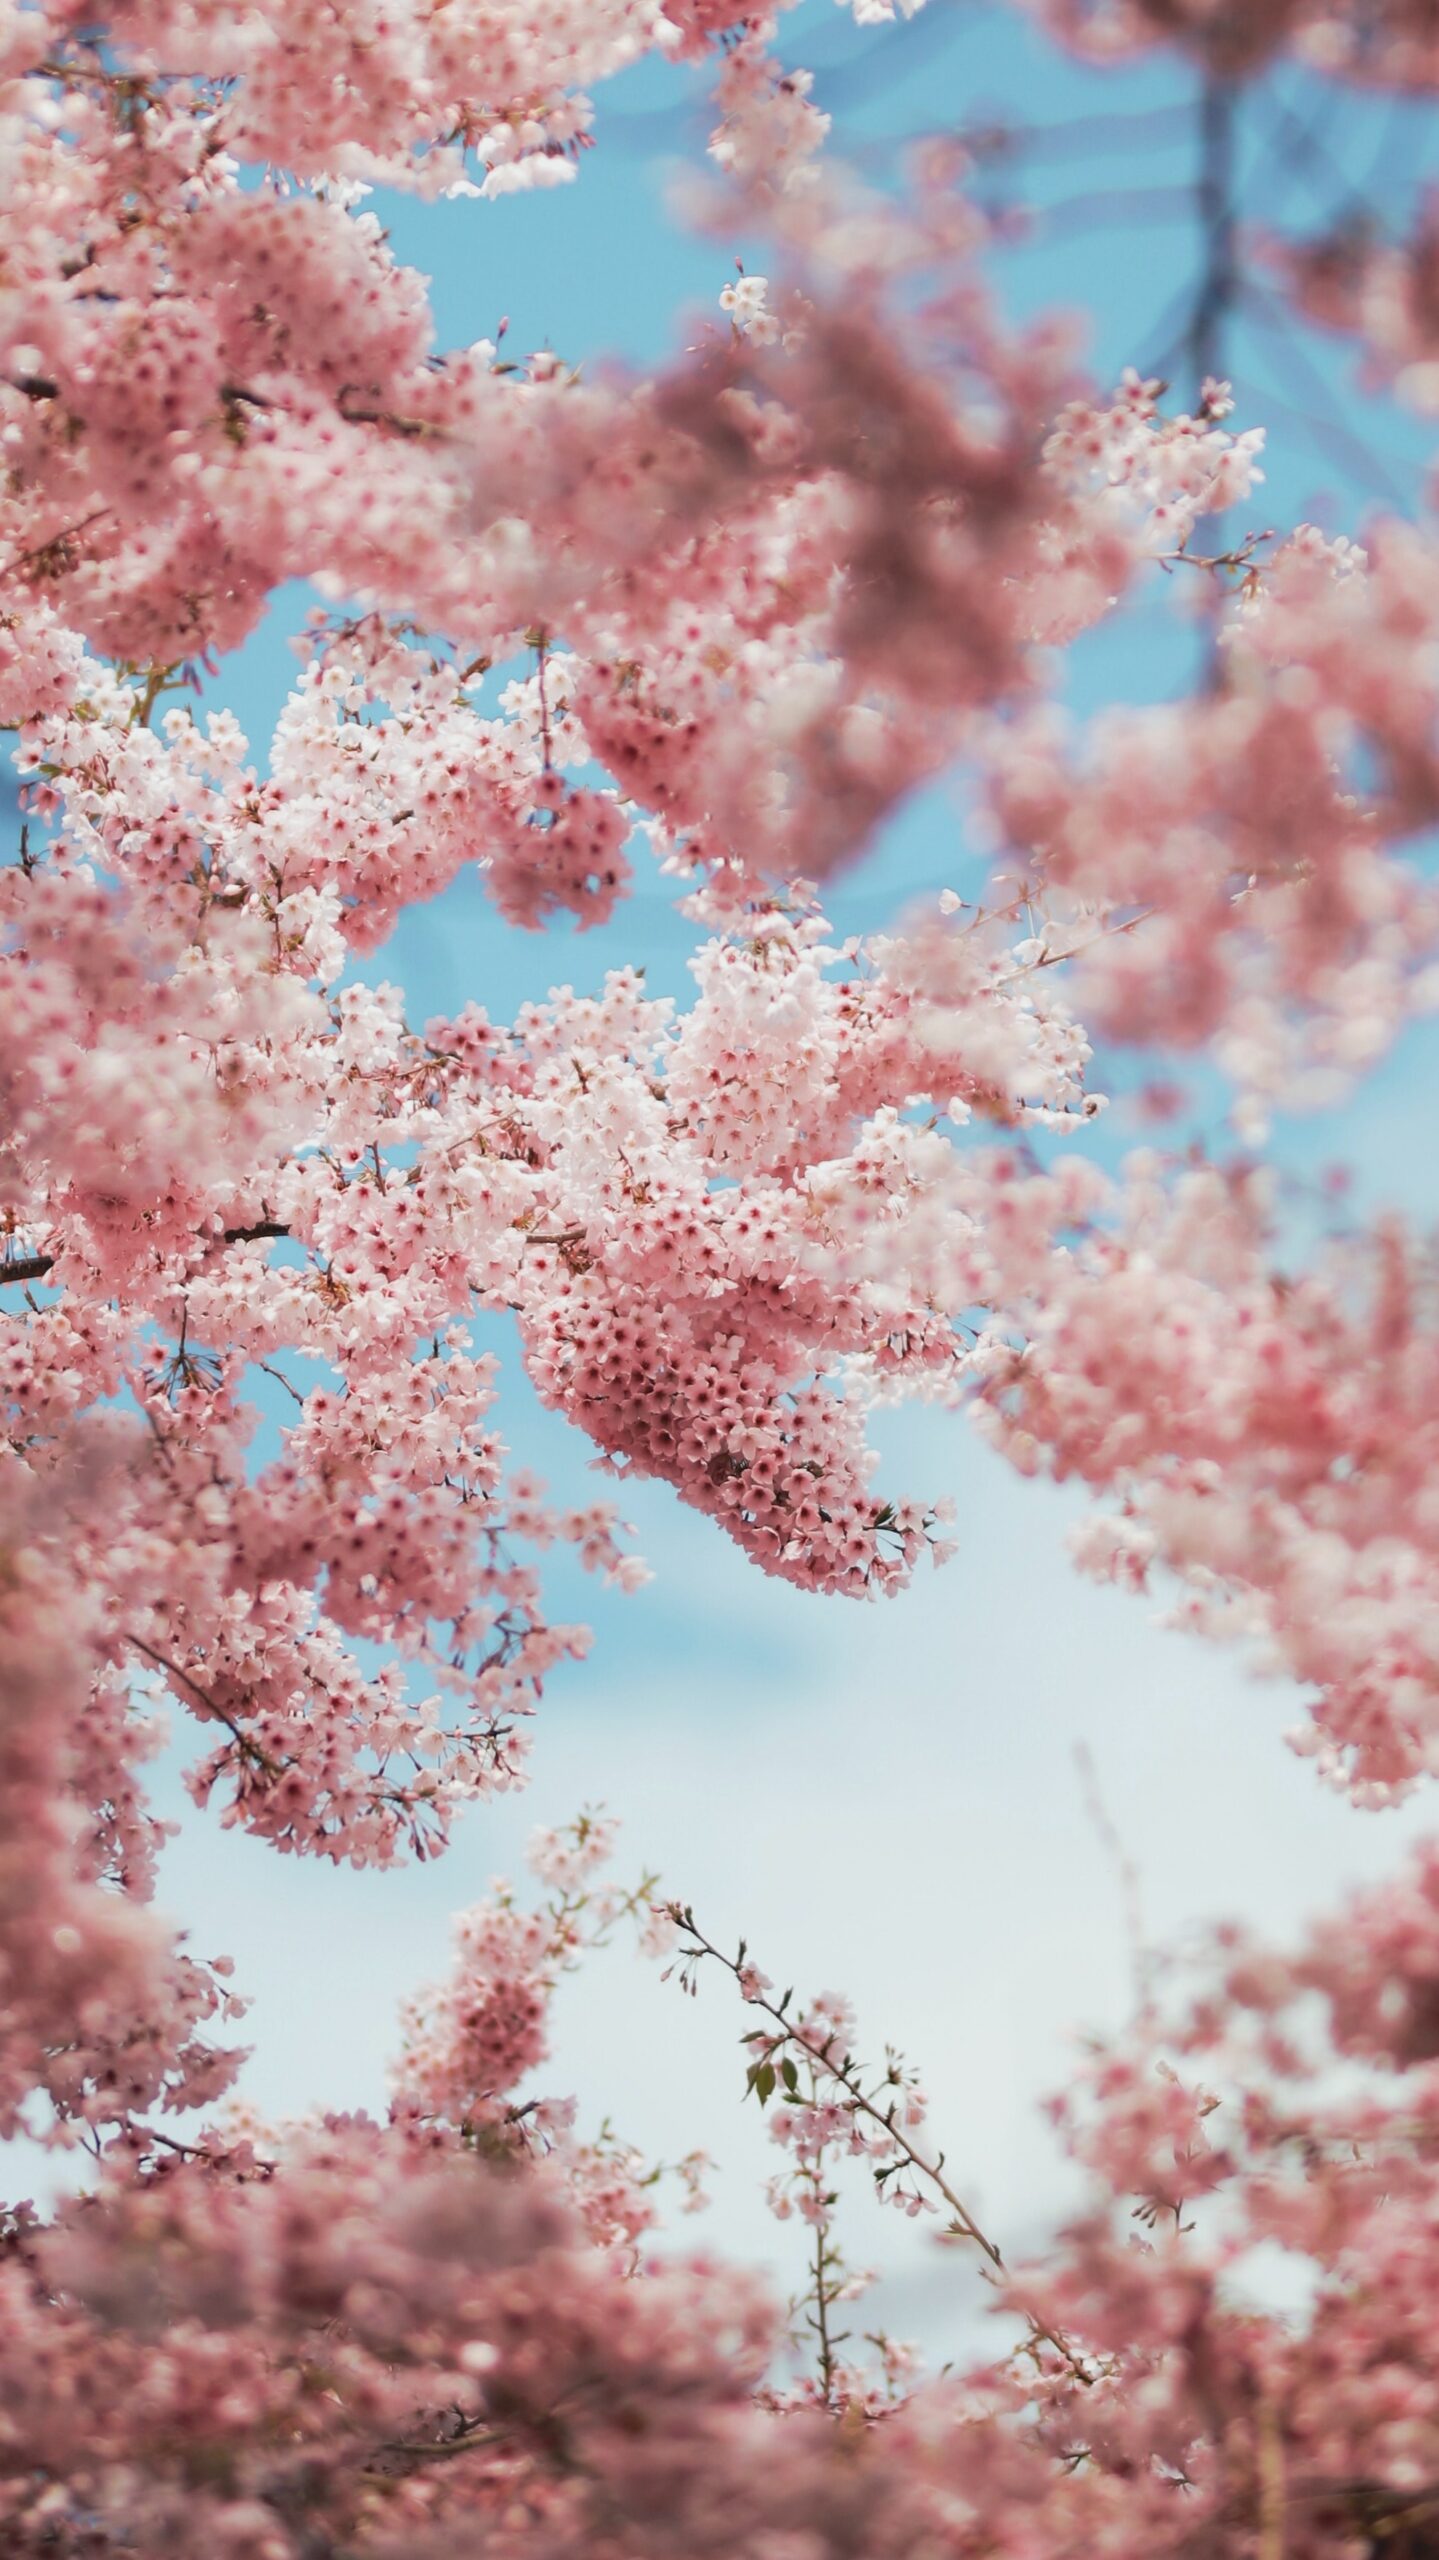 Pink cherry blossoms agains a blue sky